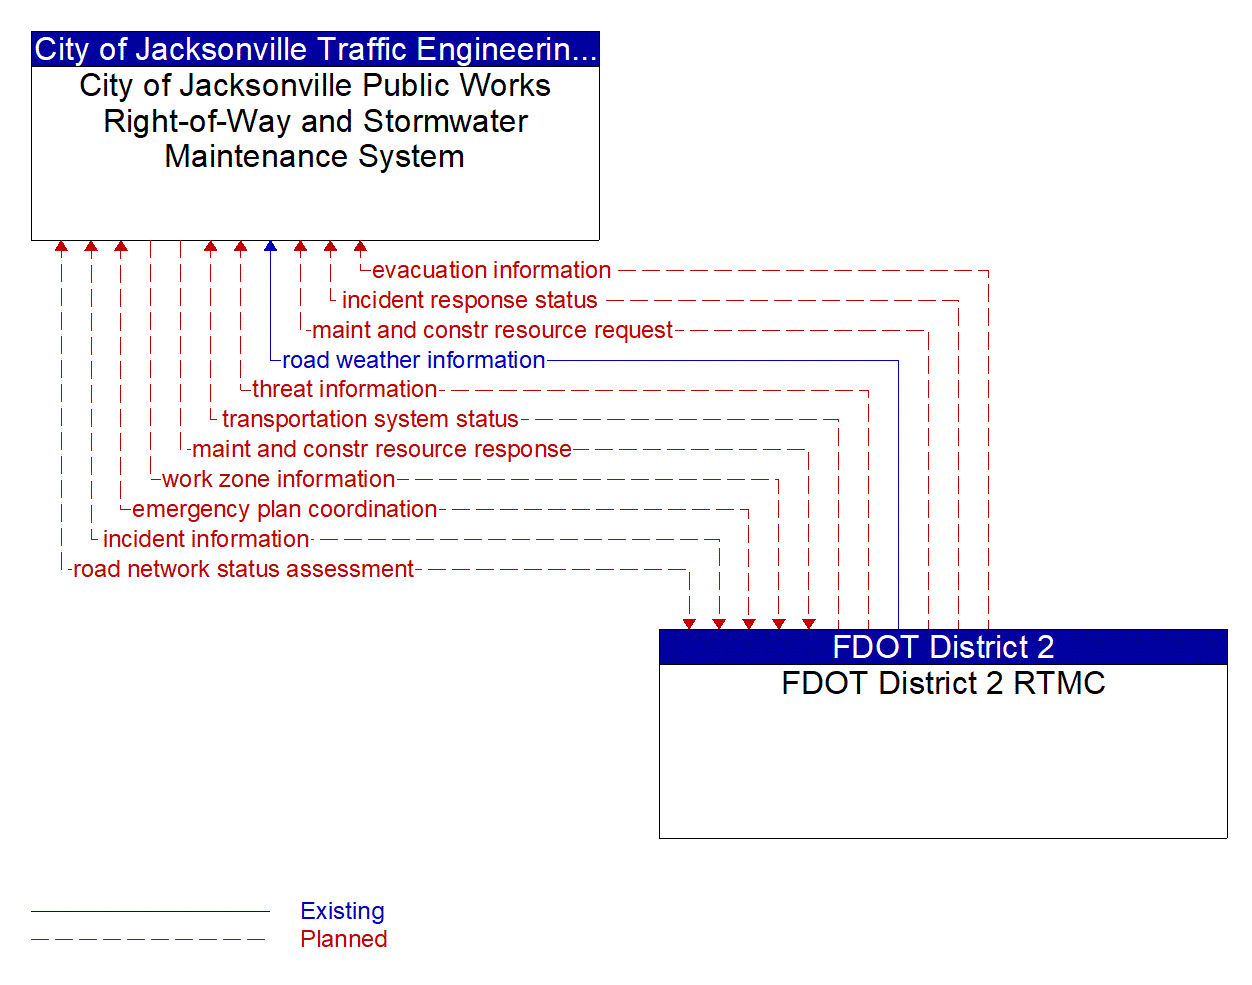 Architecture Flow Diagram: FDOT District 2 RTMC <--> City of Jacksonville Public Works Right-of-Way and Stormwater Maintenance System